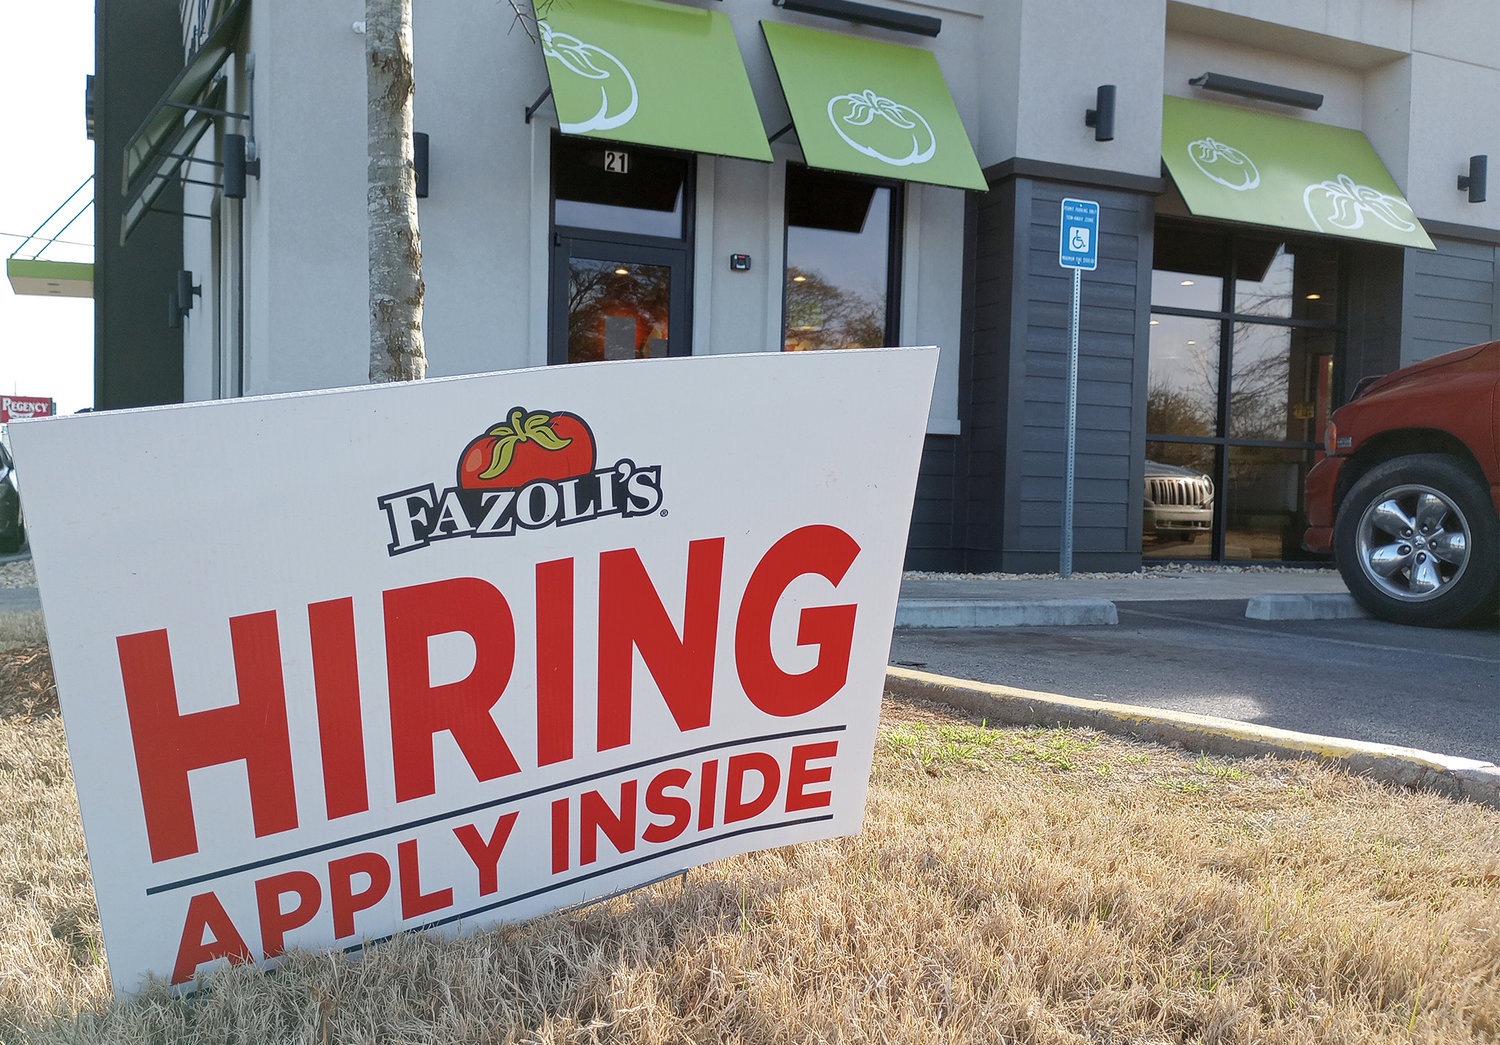 A hiring sign is seen at a restaurant in Cartersville, Ga., March 21, 2023. (Index/Henry Durand, File)